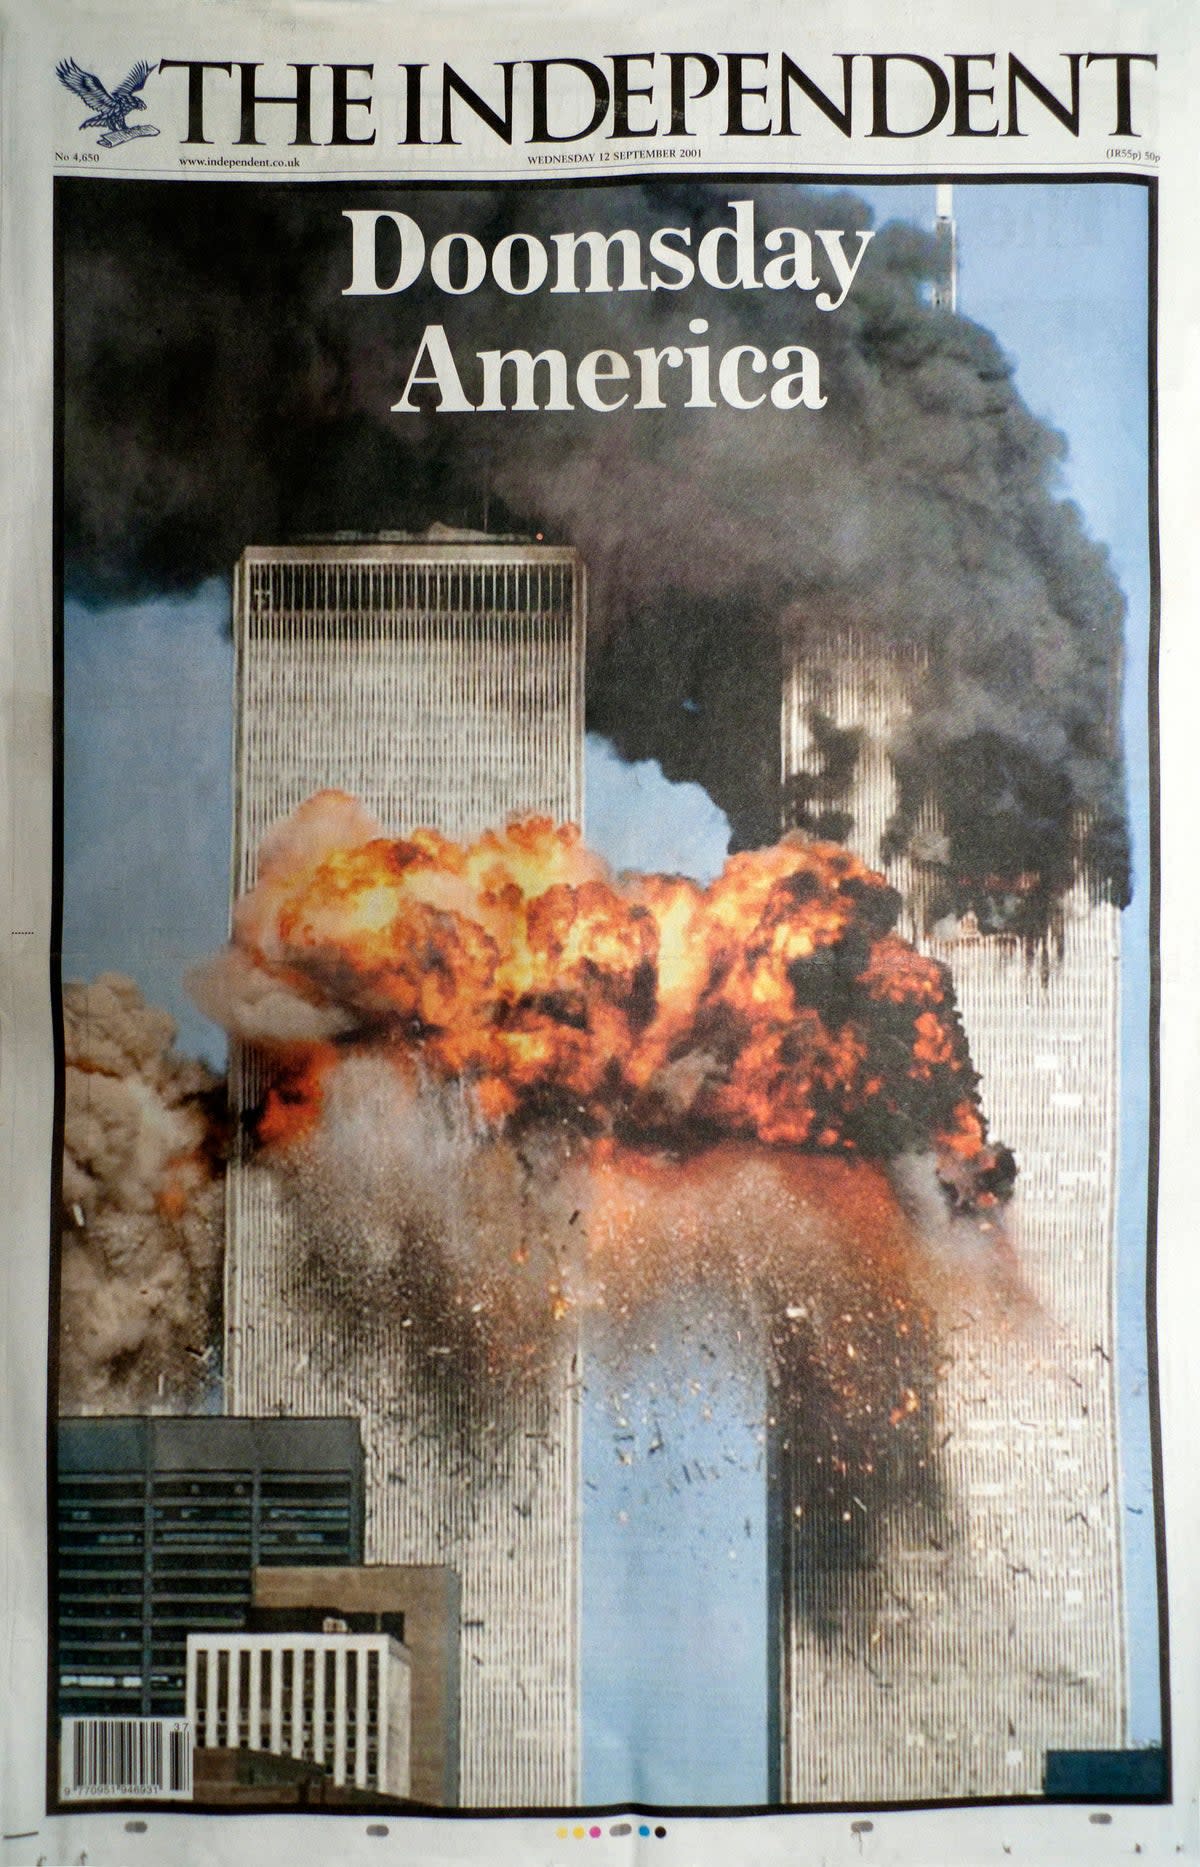 The Independent’s front page on 12 September, 2001 (The Independent)